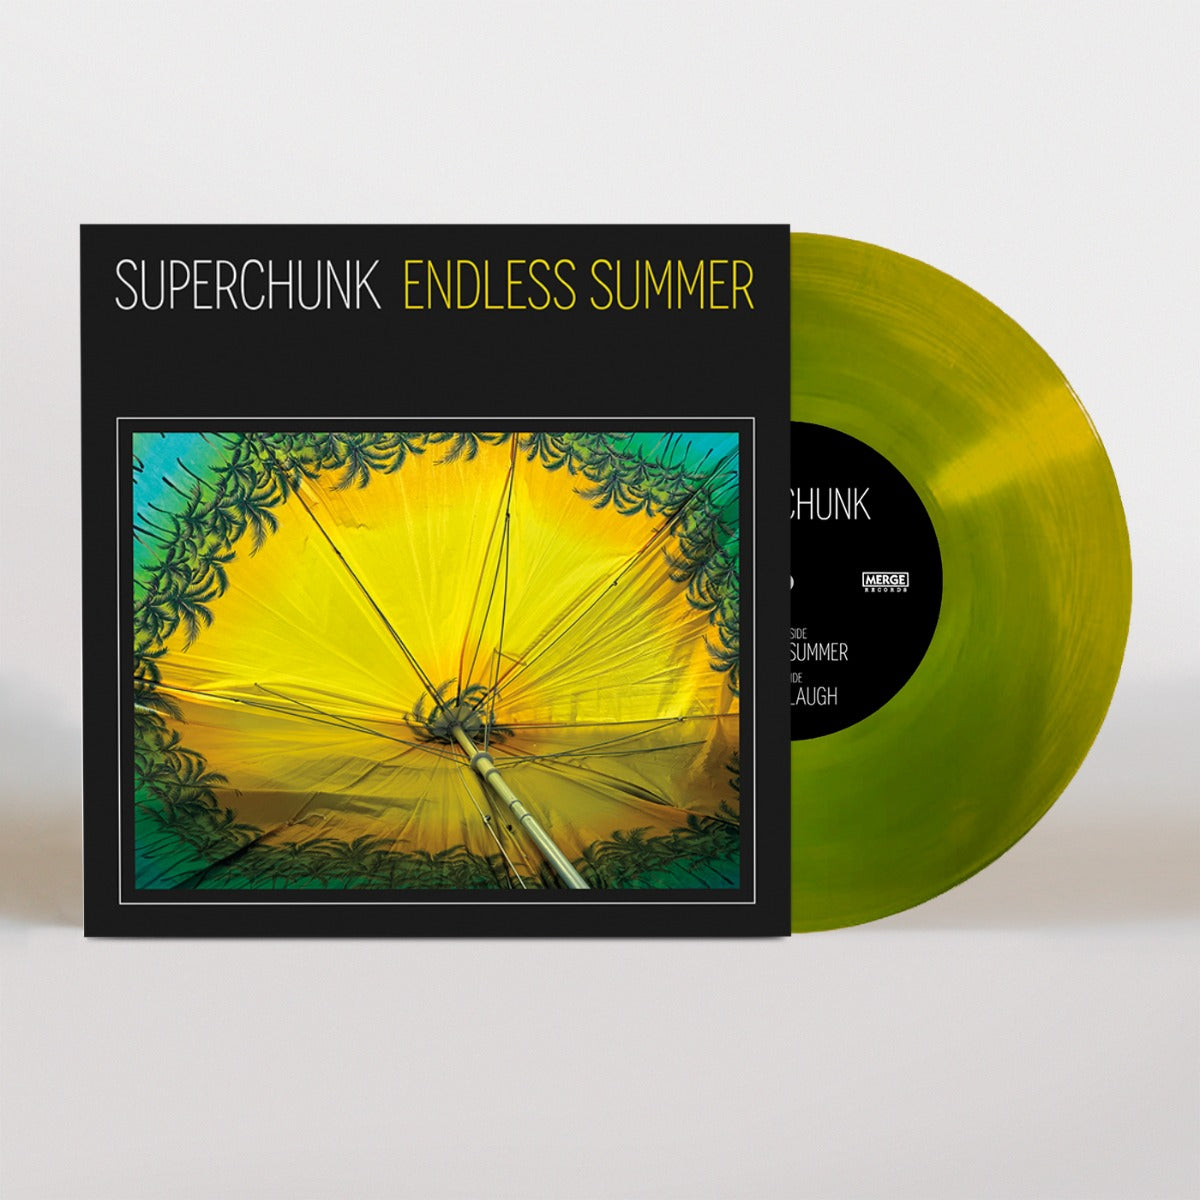 Superchunk - "Endless Summer" b/w "When I Laugh" 7-inch INDIE EXCLUSIVE VARIANT